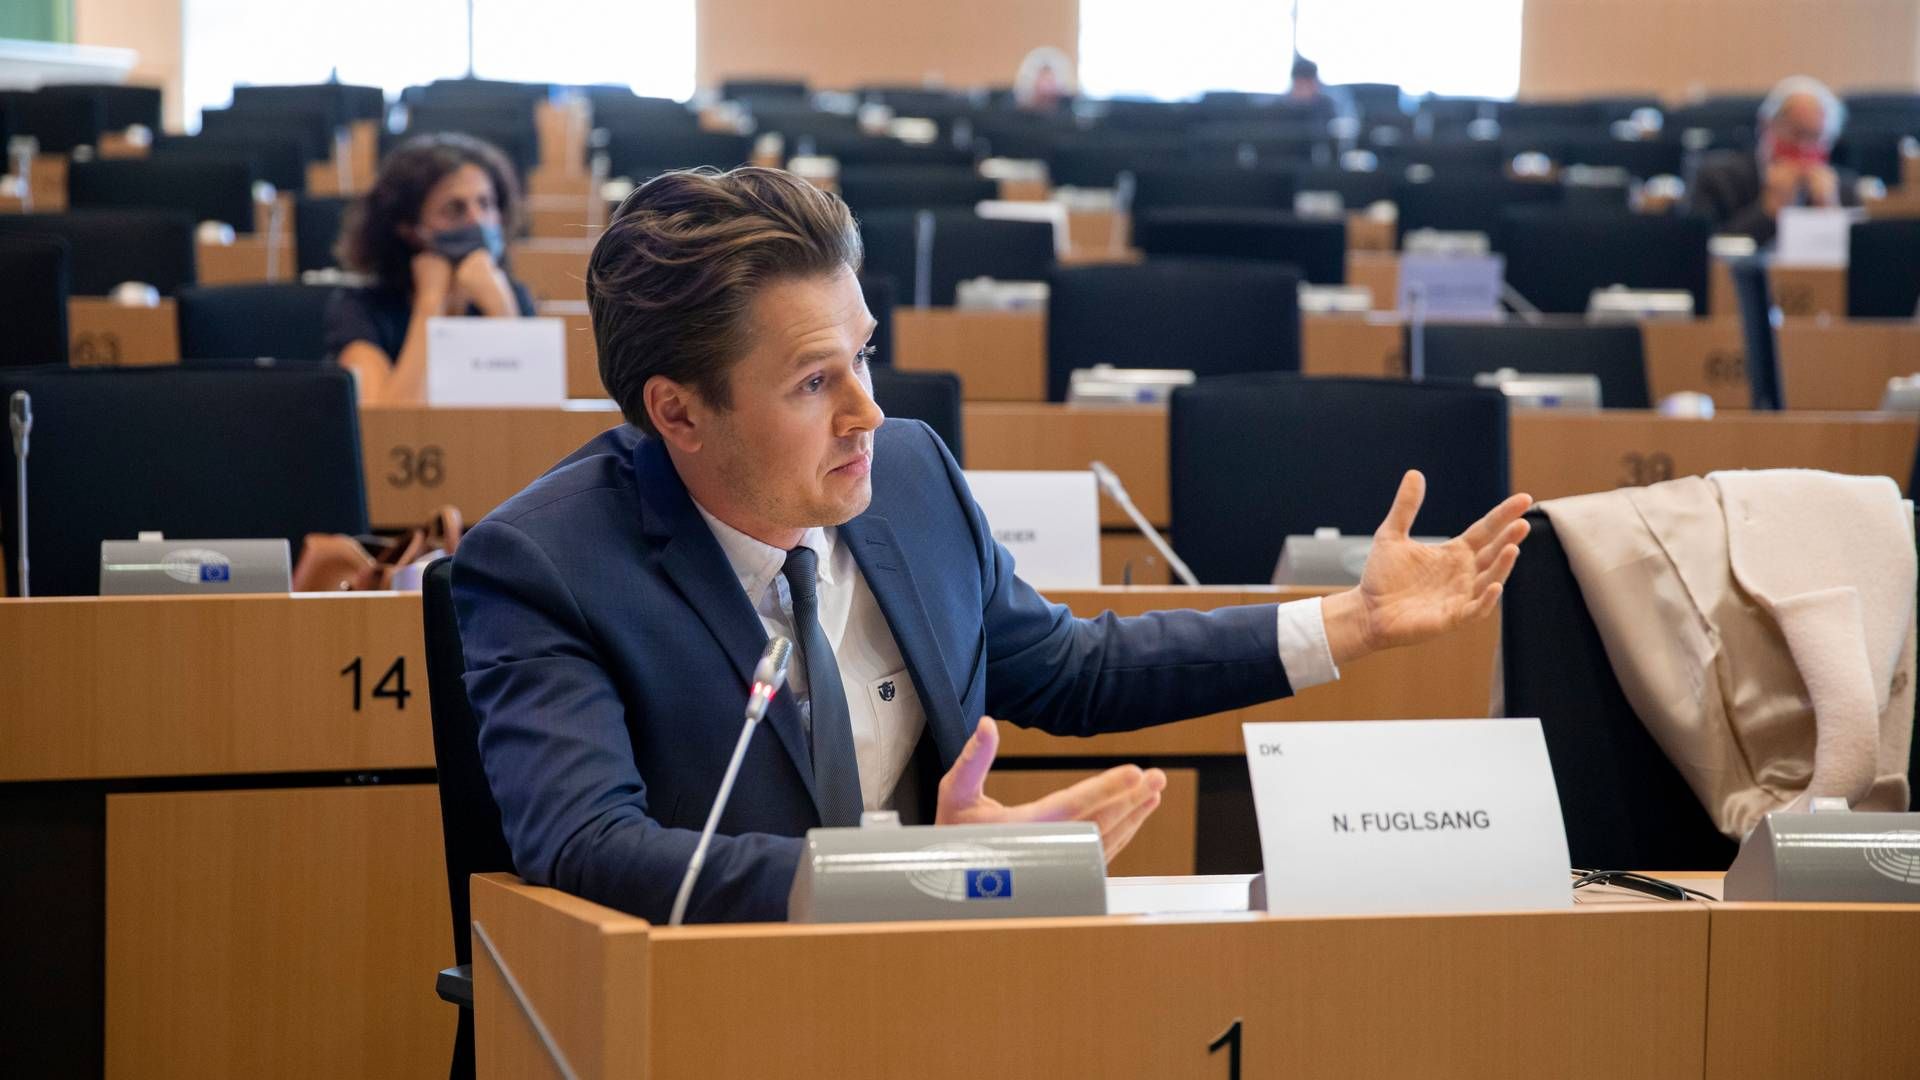 Niels Fuglsang is a member of the Danish Social Democratic Party, and he serves as chief negotiator in the EU Parliament on a revision of the energy efficiency directive. The Swedish presidency will oversee negotiations between the Council and Parliament. | Photo: Mew